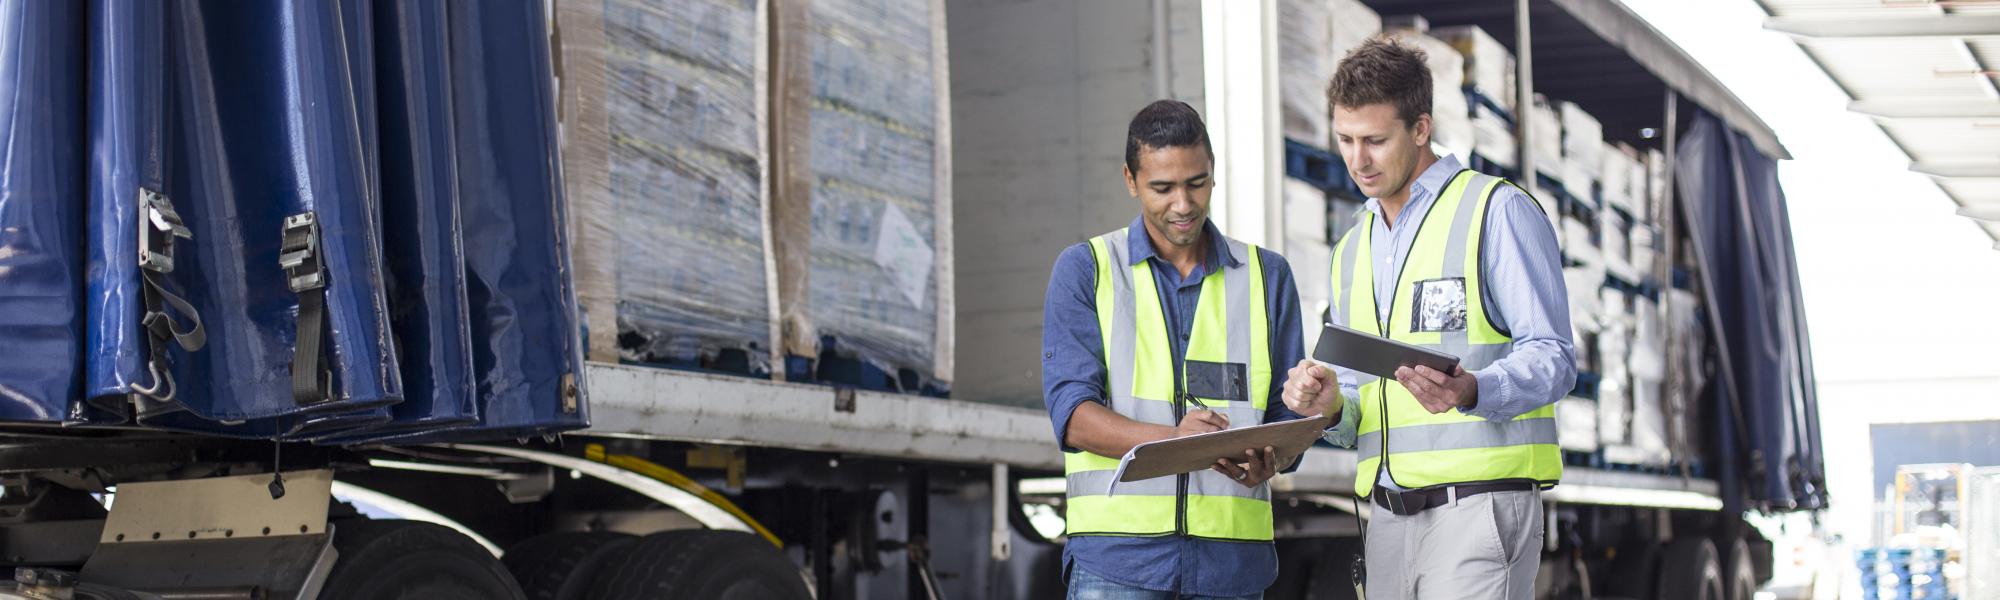 Milestone for road transport companies to digitalise further within reach